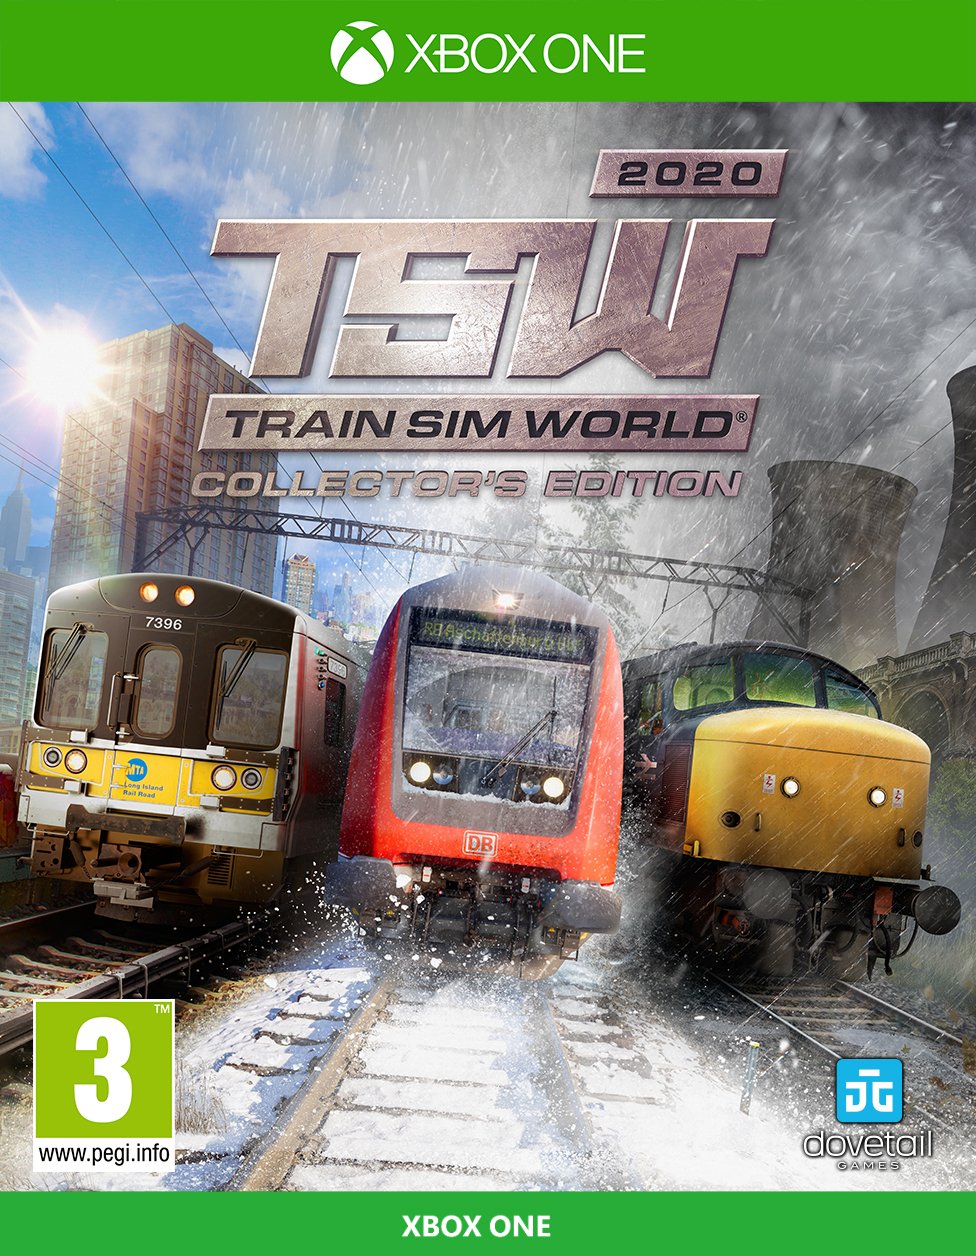 Train Sim World 2020 Collectors Edition Xbox One Game Review